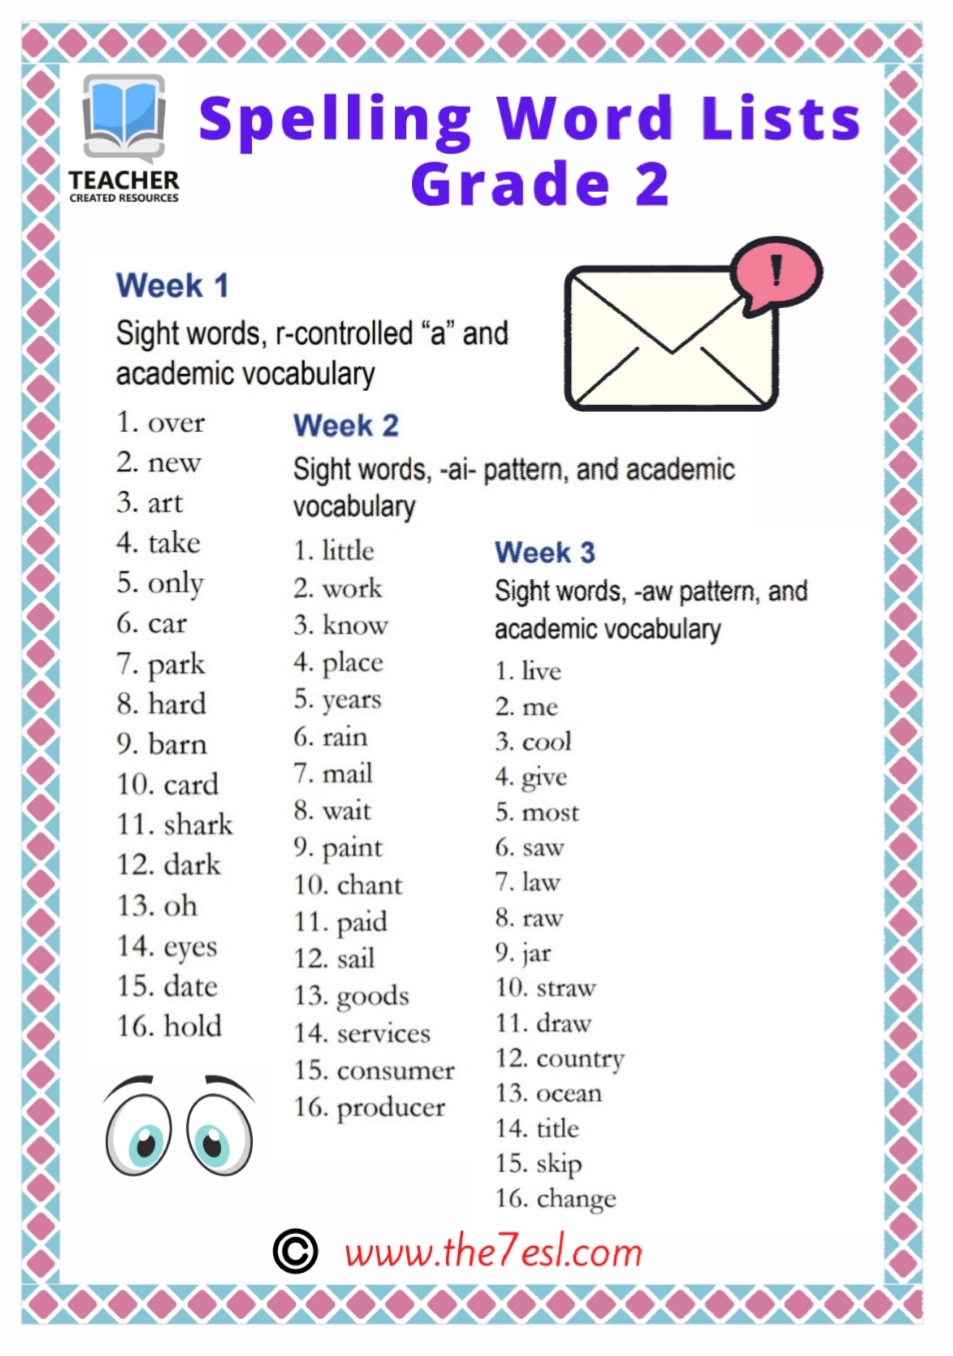 Spelling Word Lists Grade 2 English Created Resources